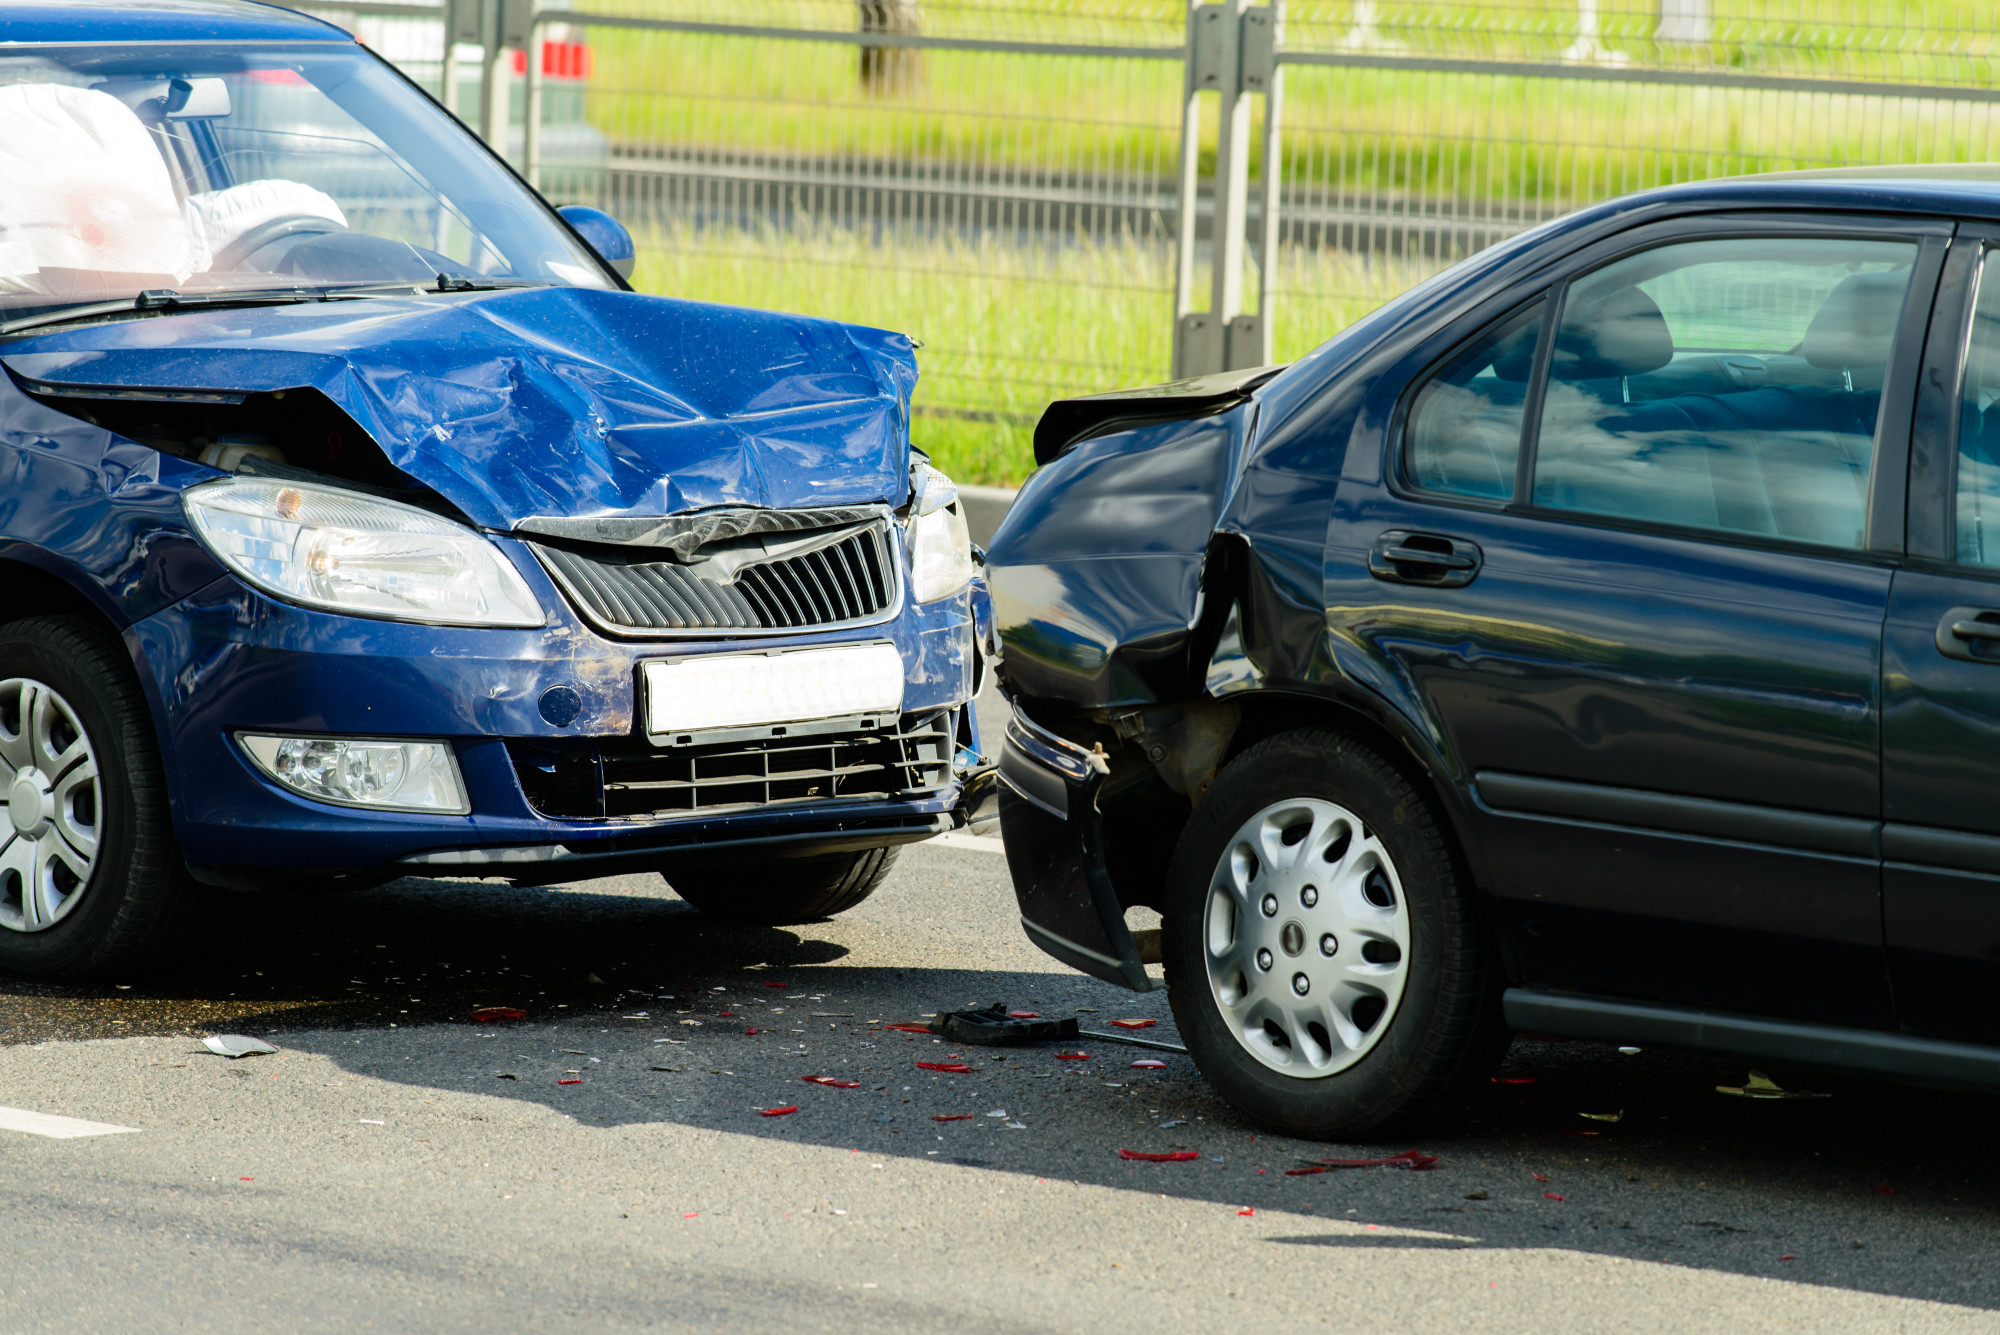 Here's What You Need To Do After a Motor Vehicle Accident